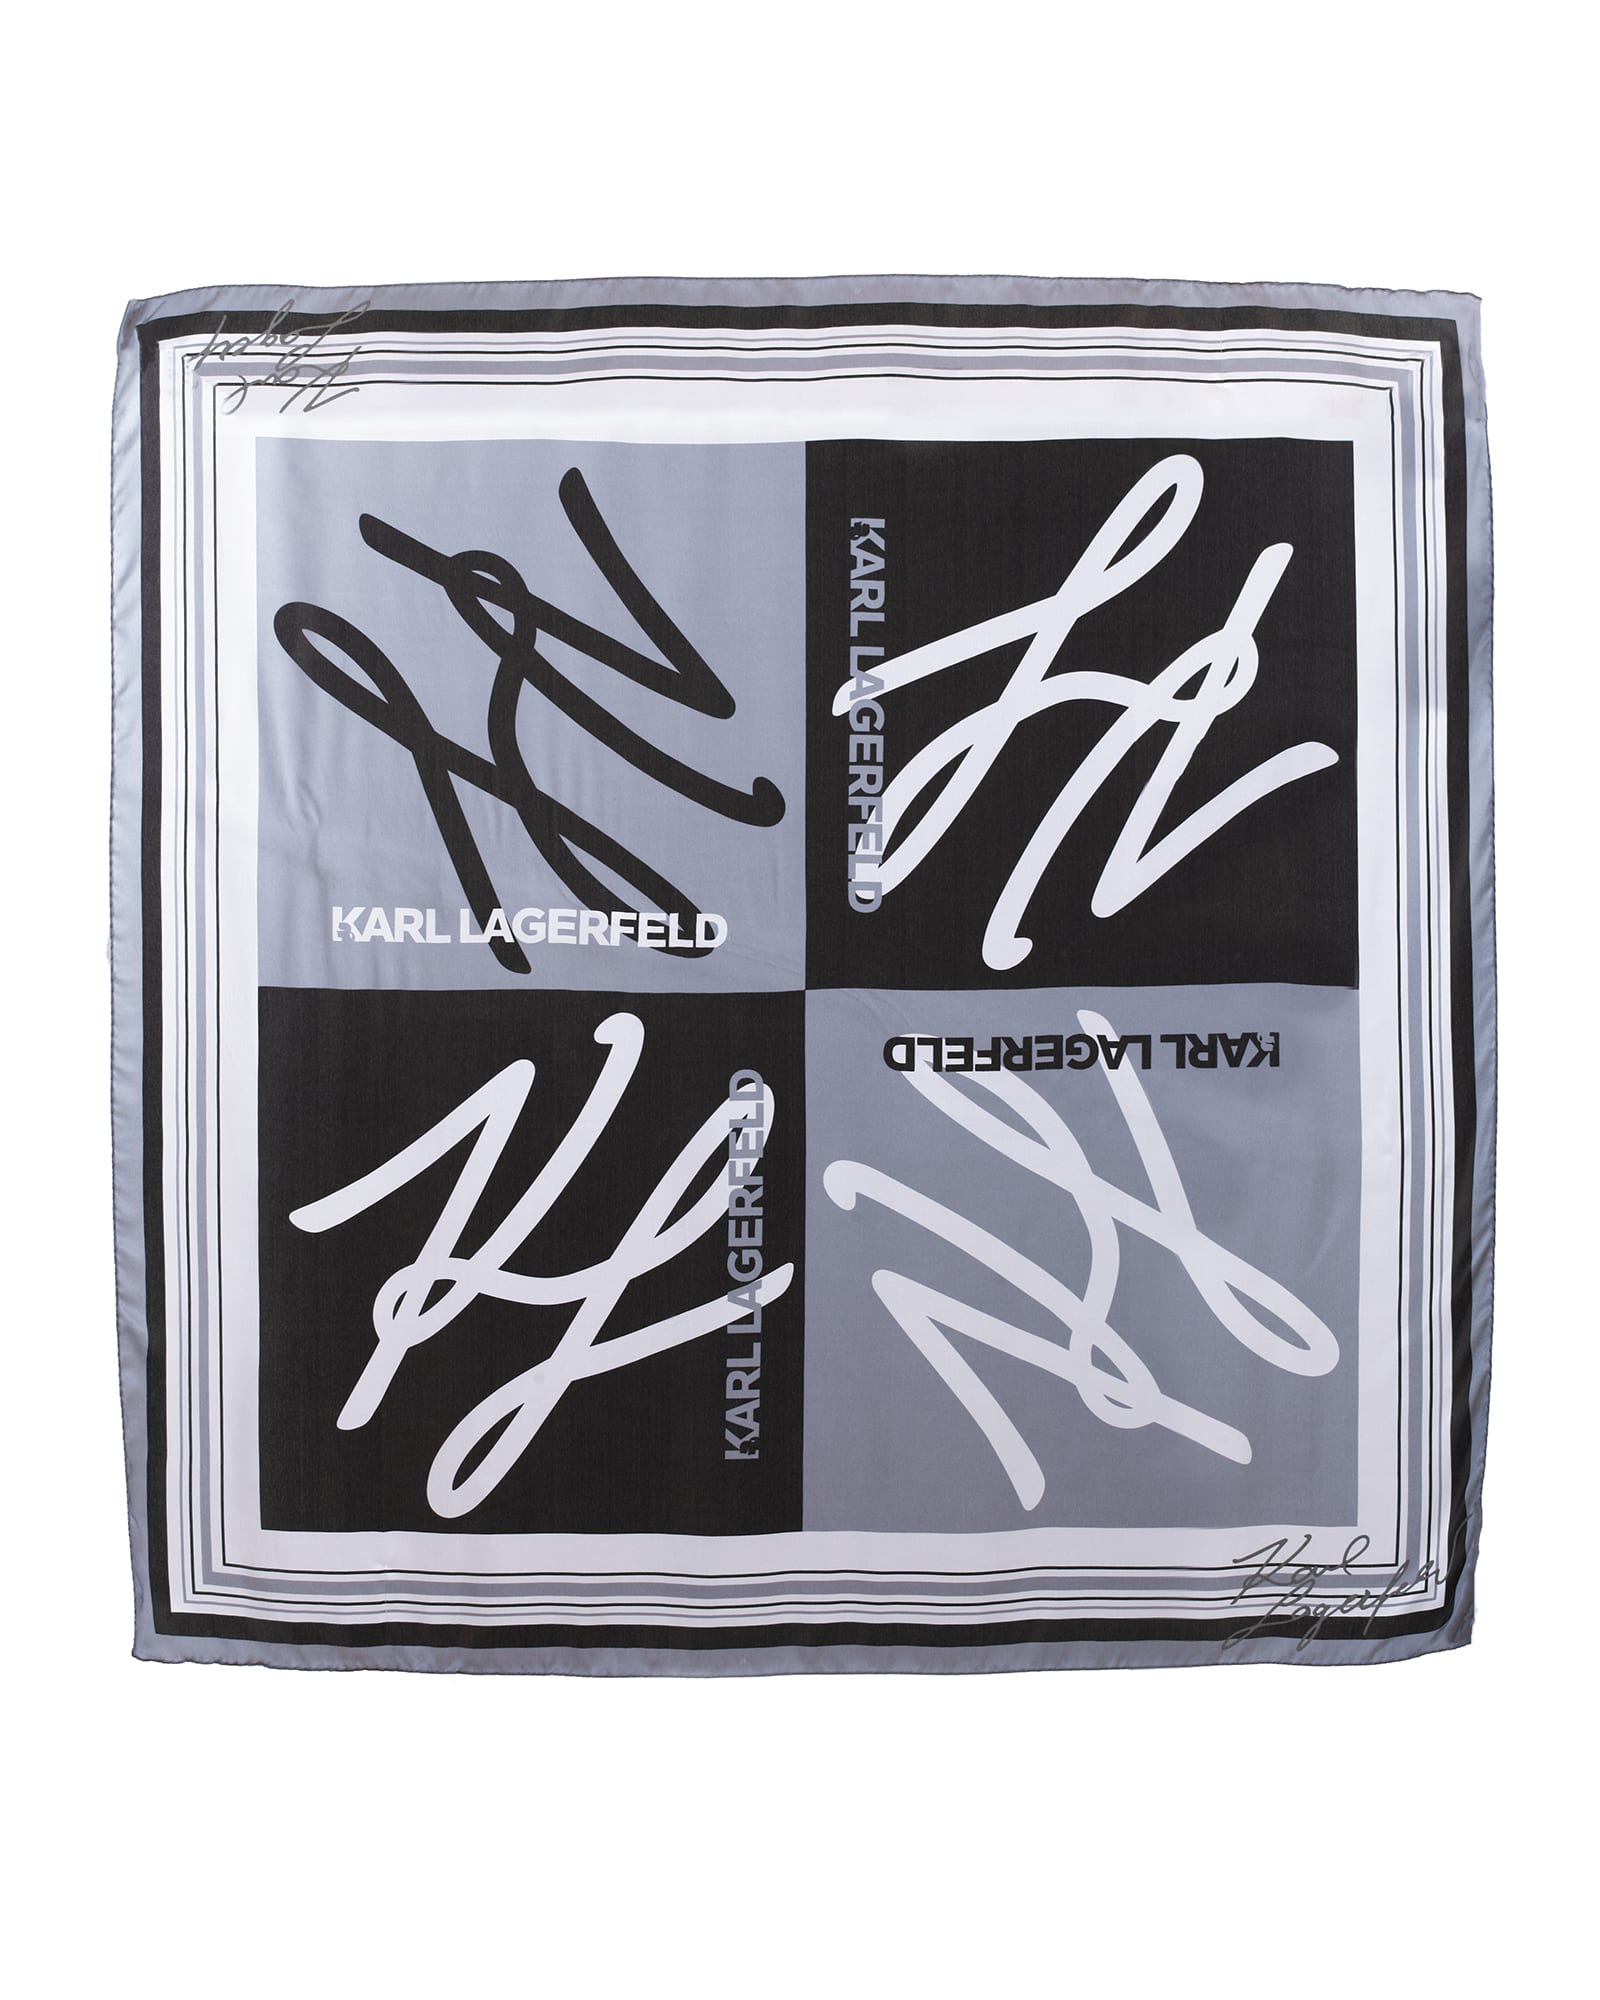 Karl Lagerfeld silk foulard, characterized by the K / Autograph graphics